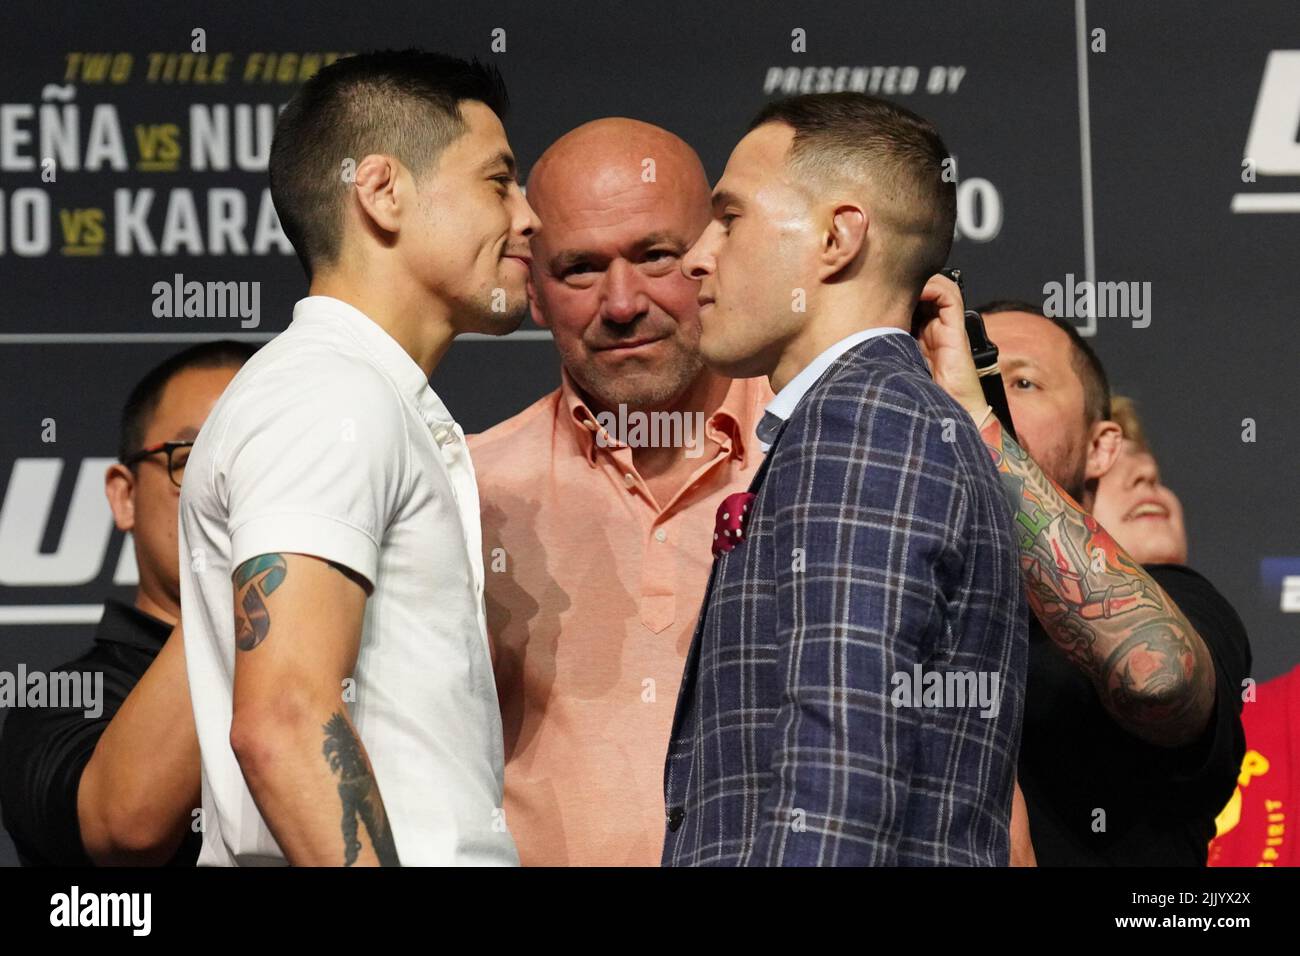 Dallas, Texas, United States. 28th July, 2022. DALLAS, TX - July 28: Brandon Moreno (L) and Kai Kara-France (R) face-off for the press with fans in attendance at American Airlines Center for UFC 277 - Peña vs Nunes 2 : Press Conference on July 28, 2022 in Dallas, Texas, United States. (Photo by Louis Grasse/PxImages) Credit: Px Images/Alamy Live News Stock Photo